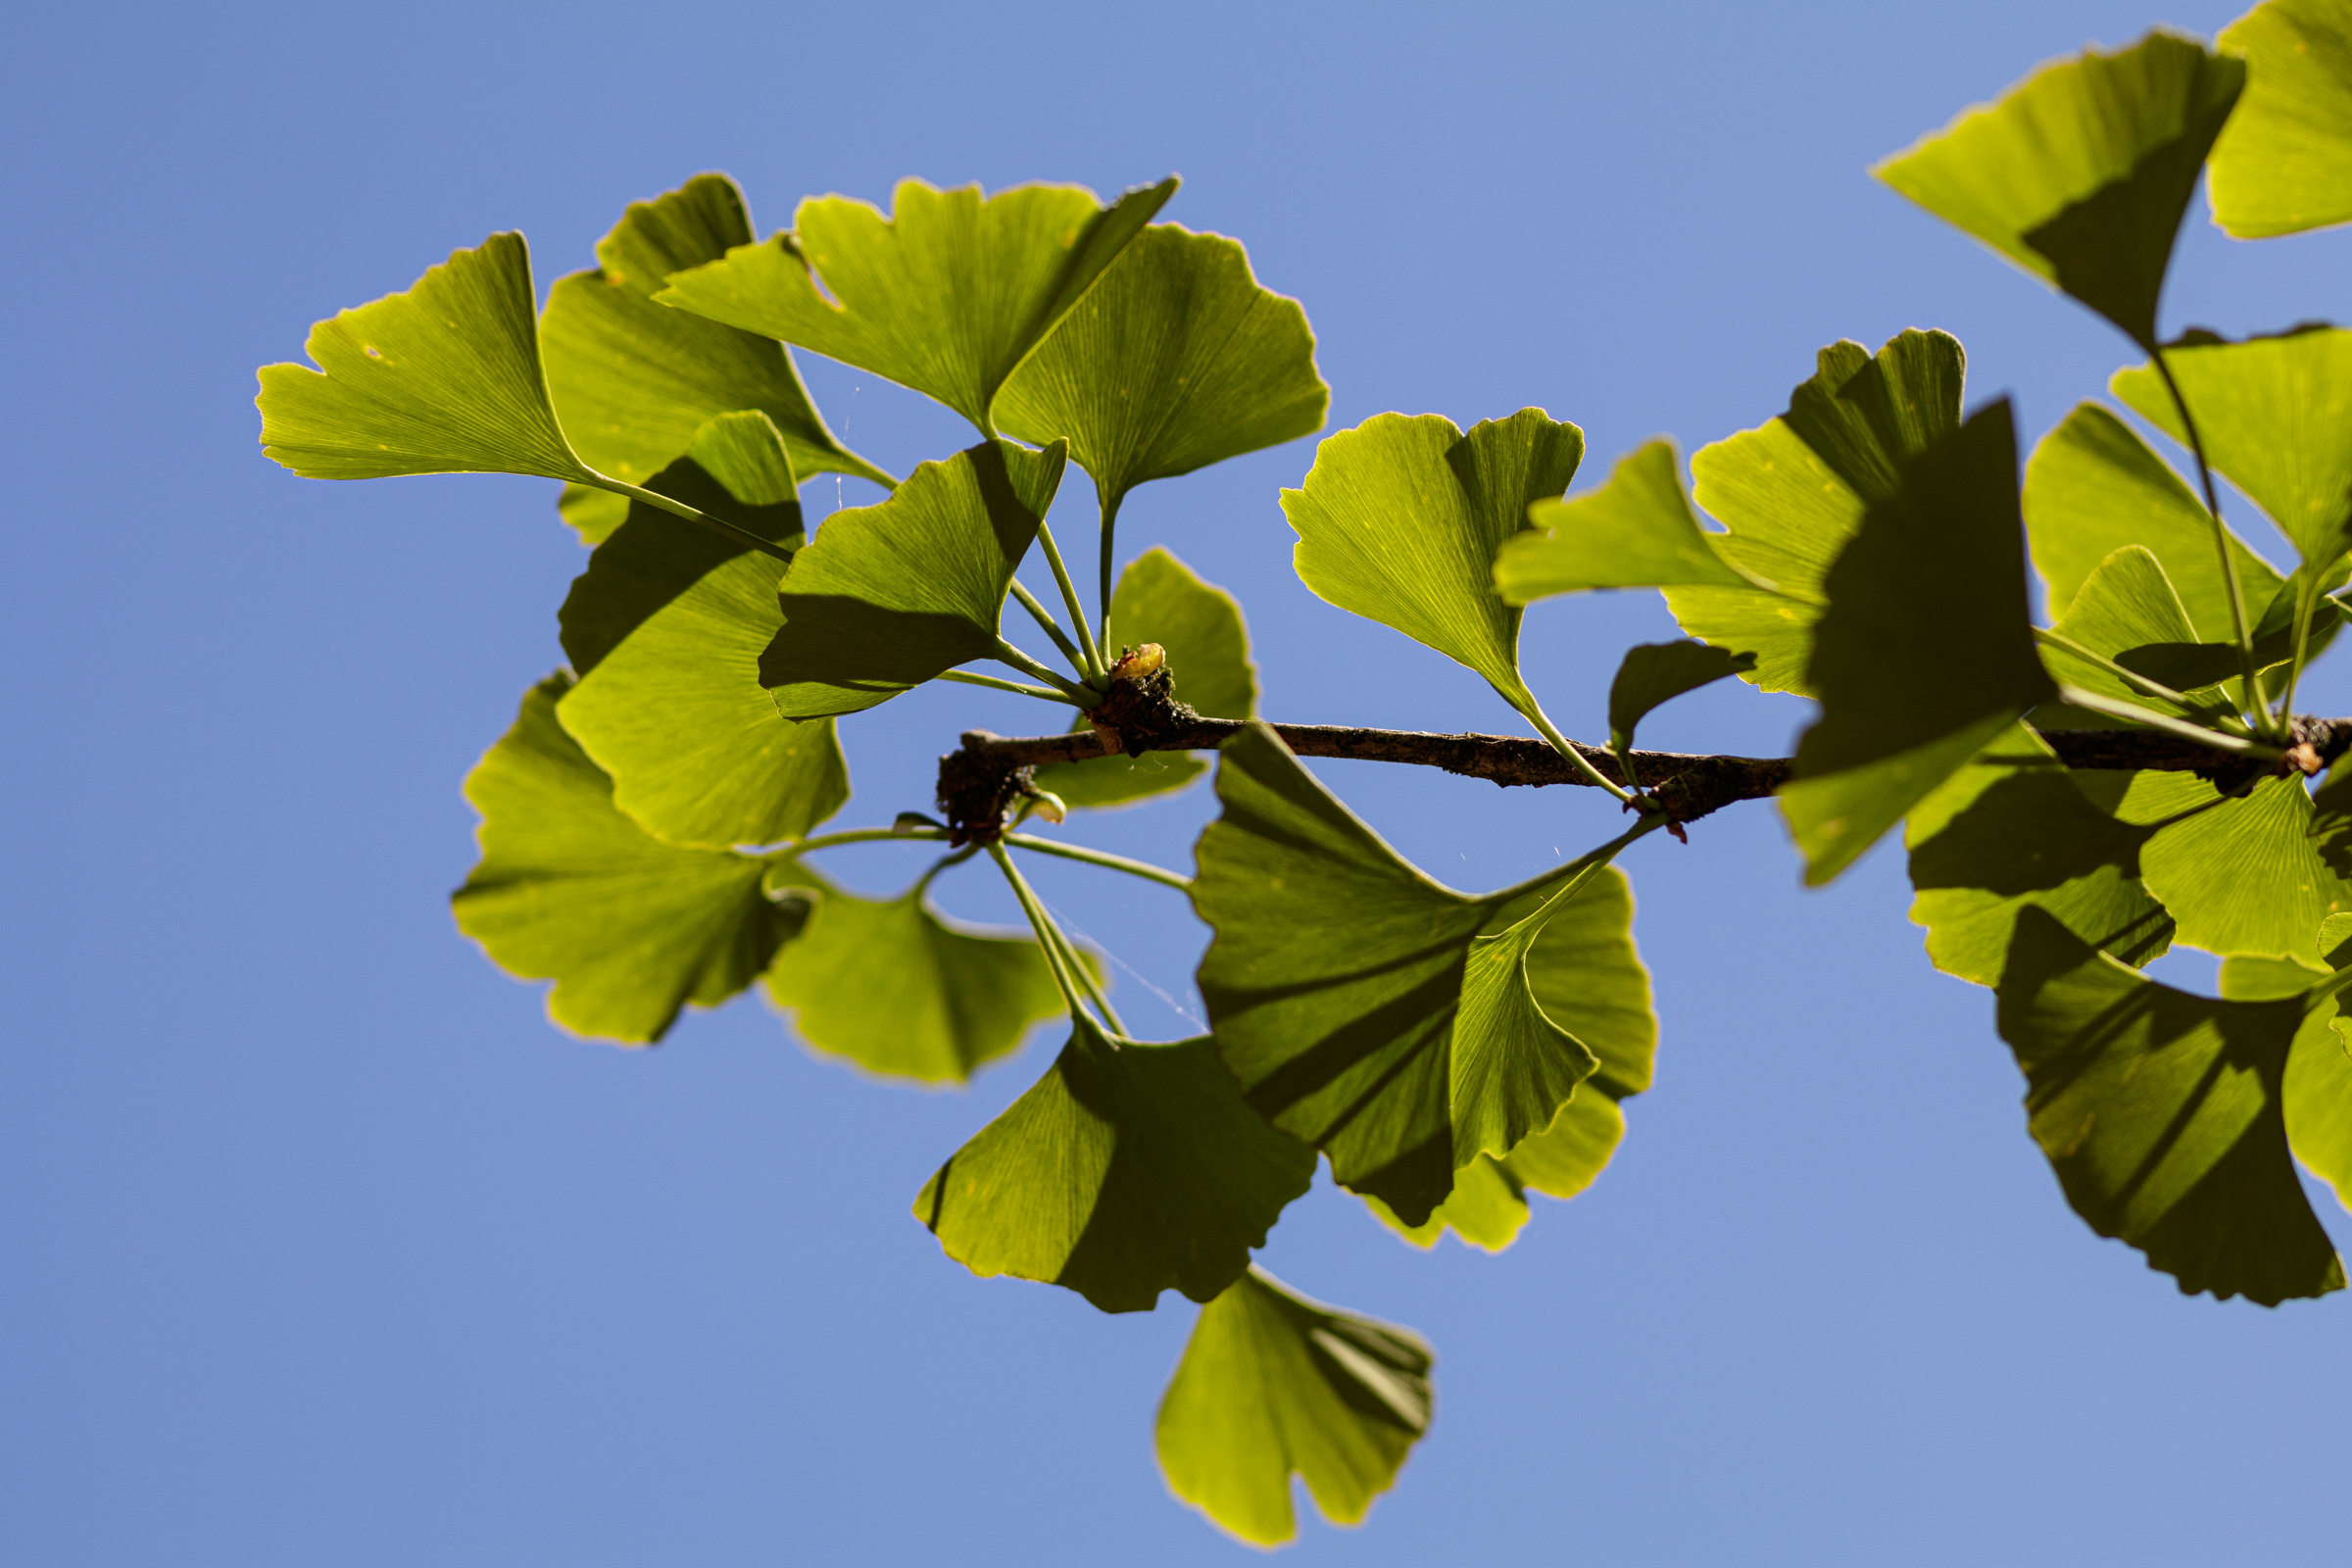 Branch of a gingko tree with green leaves set against a blue sky.